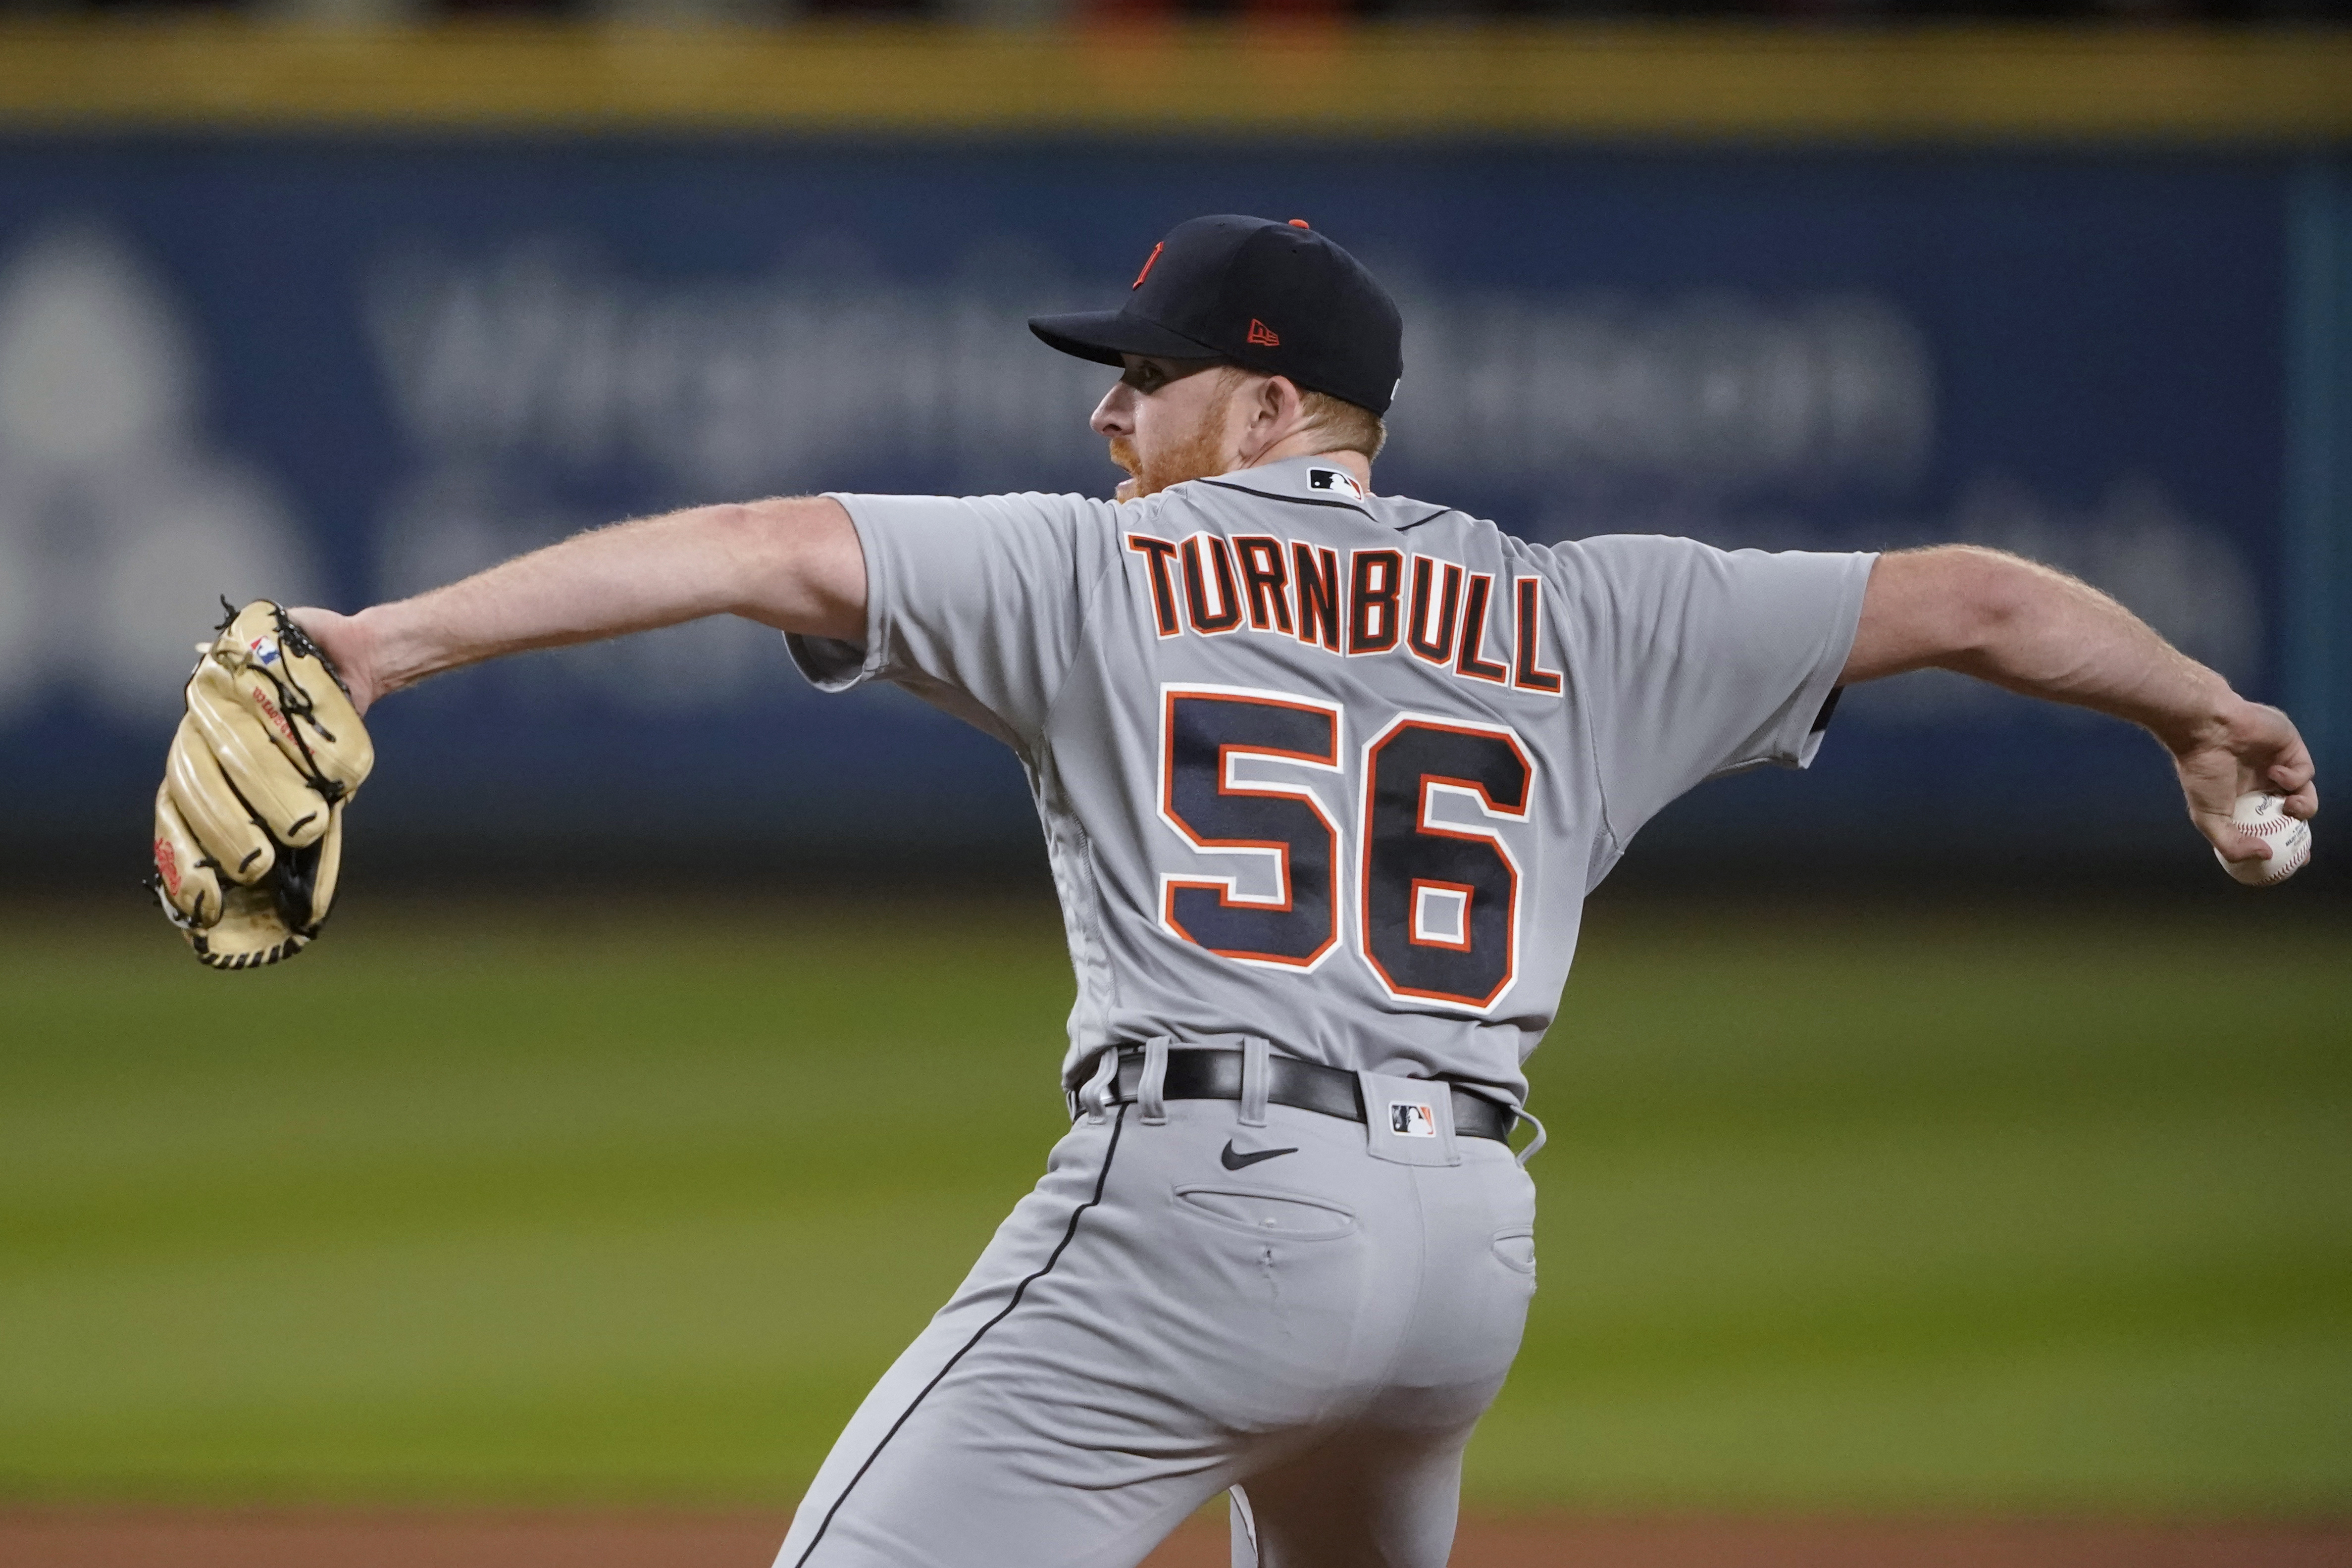 Briggs: Tigers starter Turnbull conveniently avoids demotion to